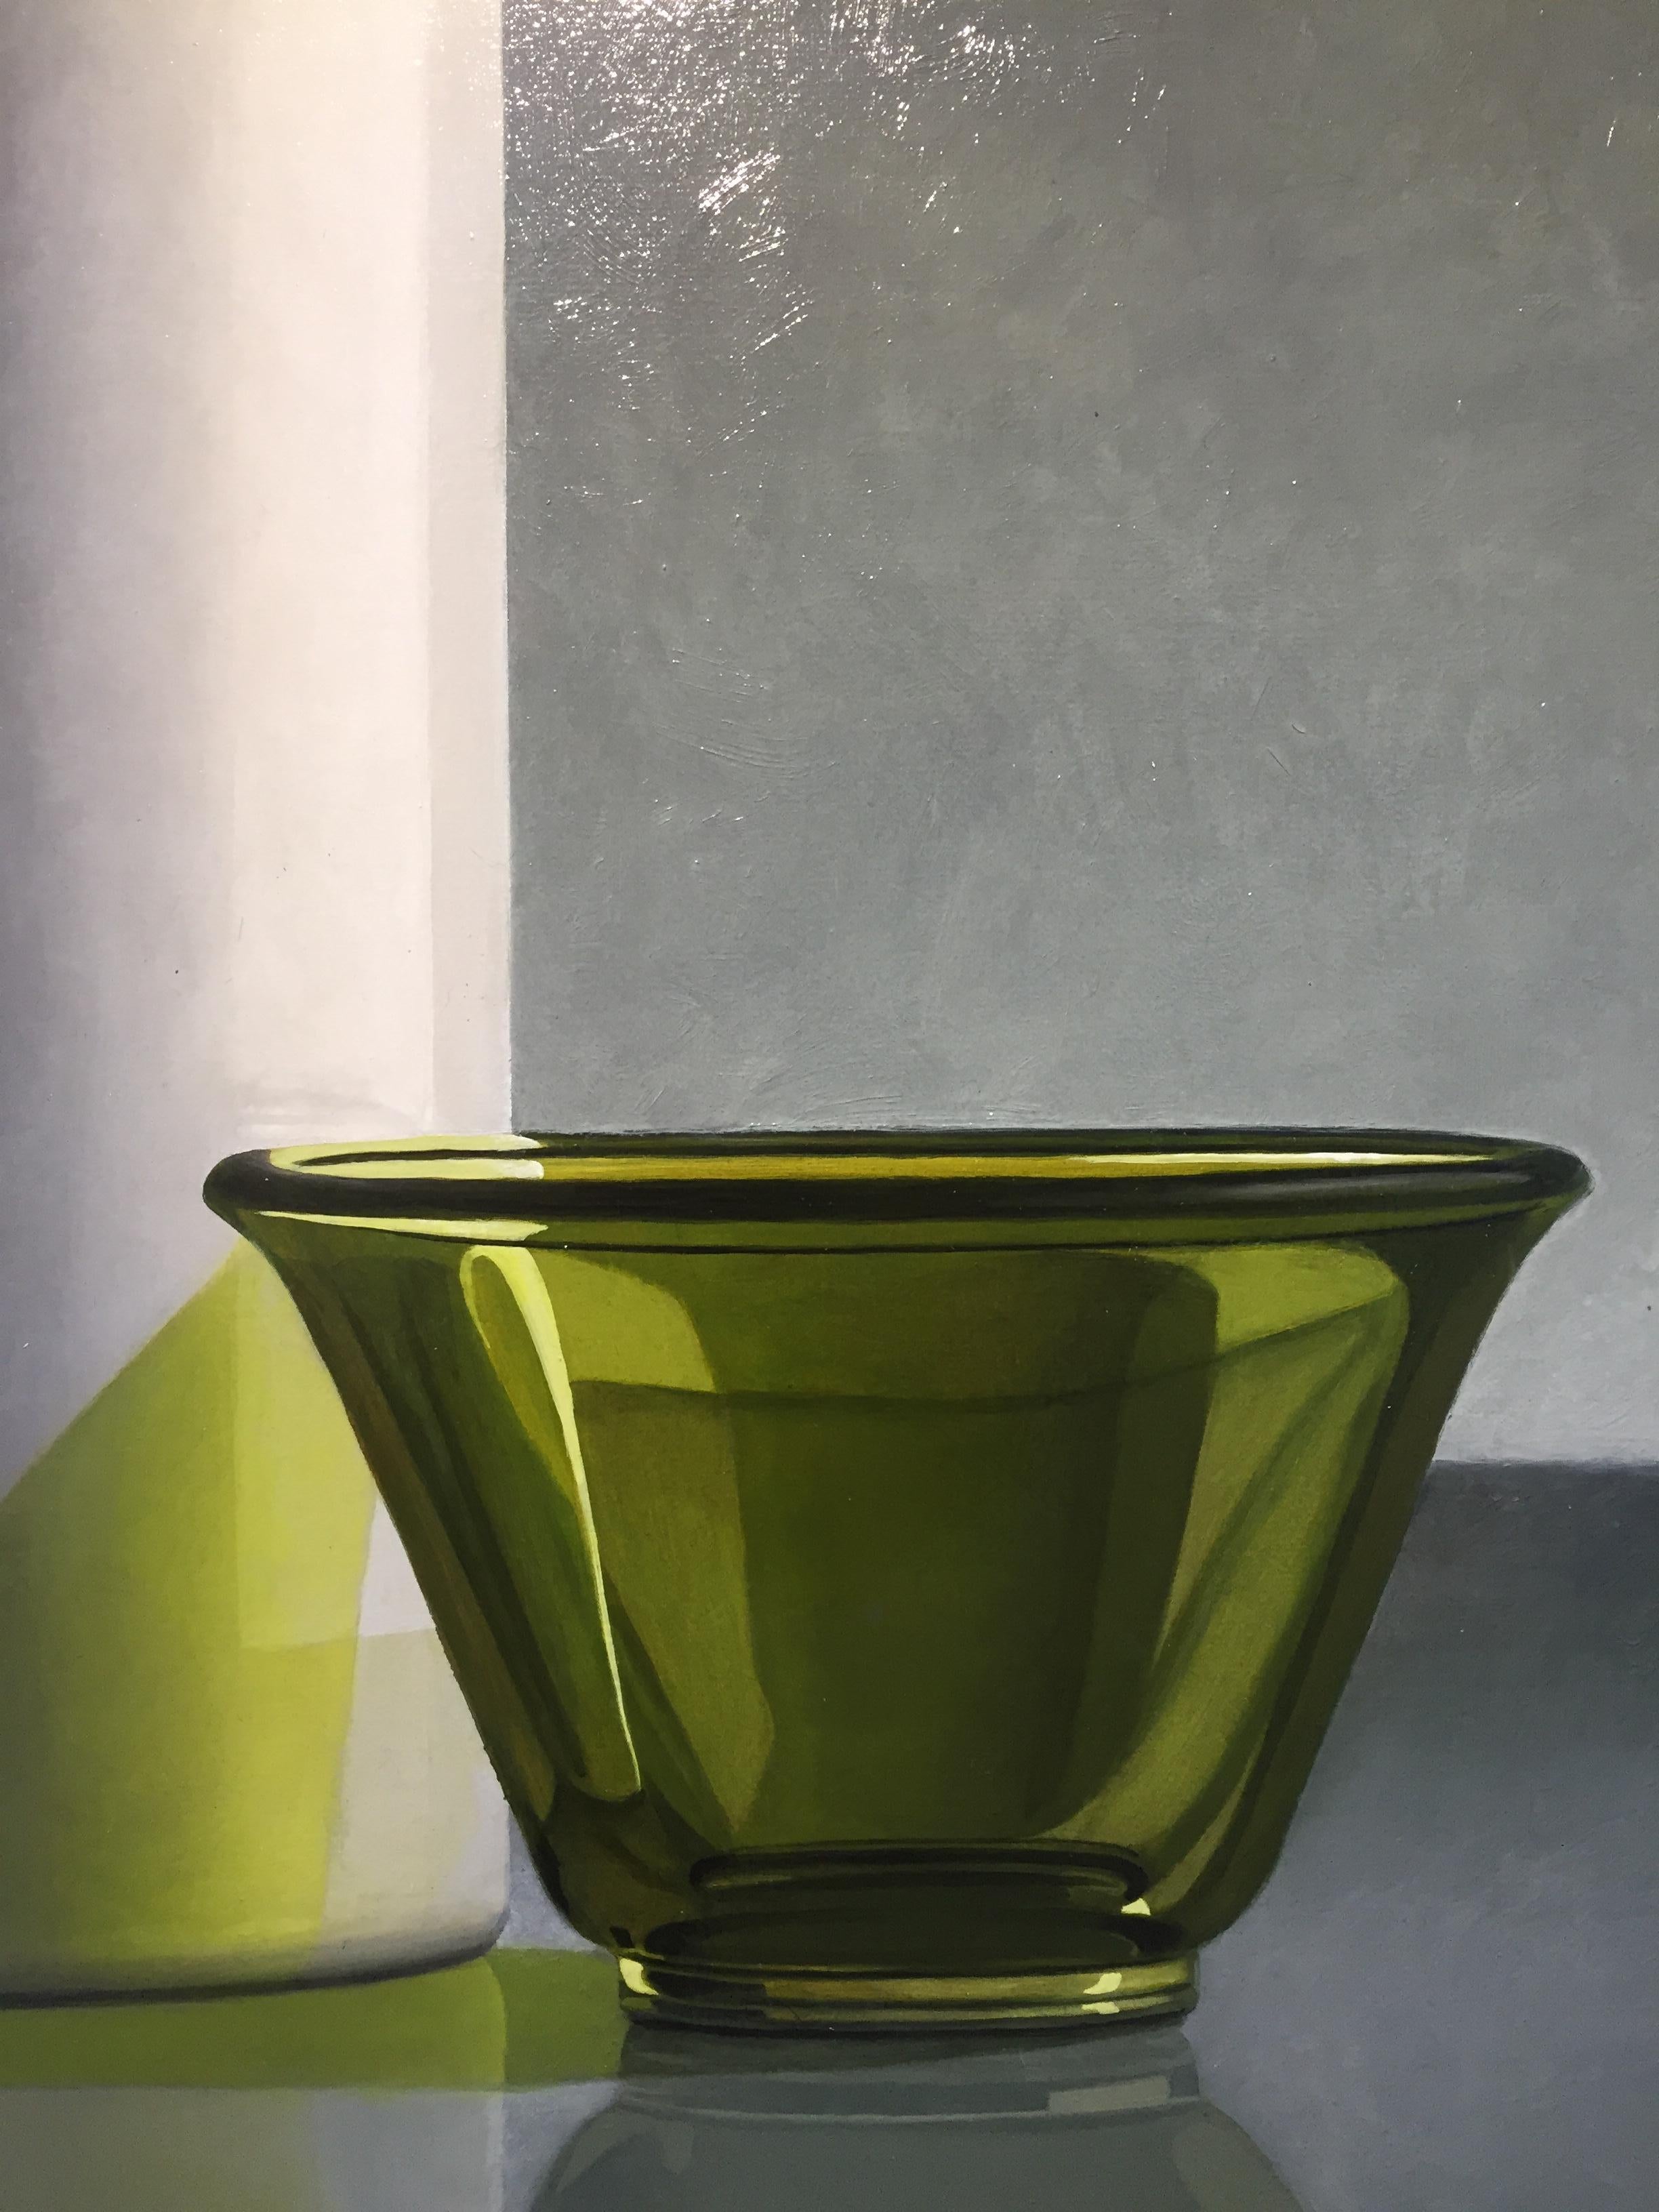 Composition in Blue and Green- 21st Century Dutch Realistic Still-life painting - Painting by Henk Boon